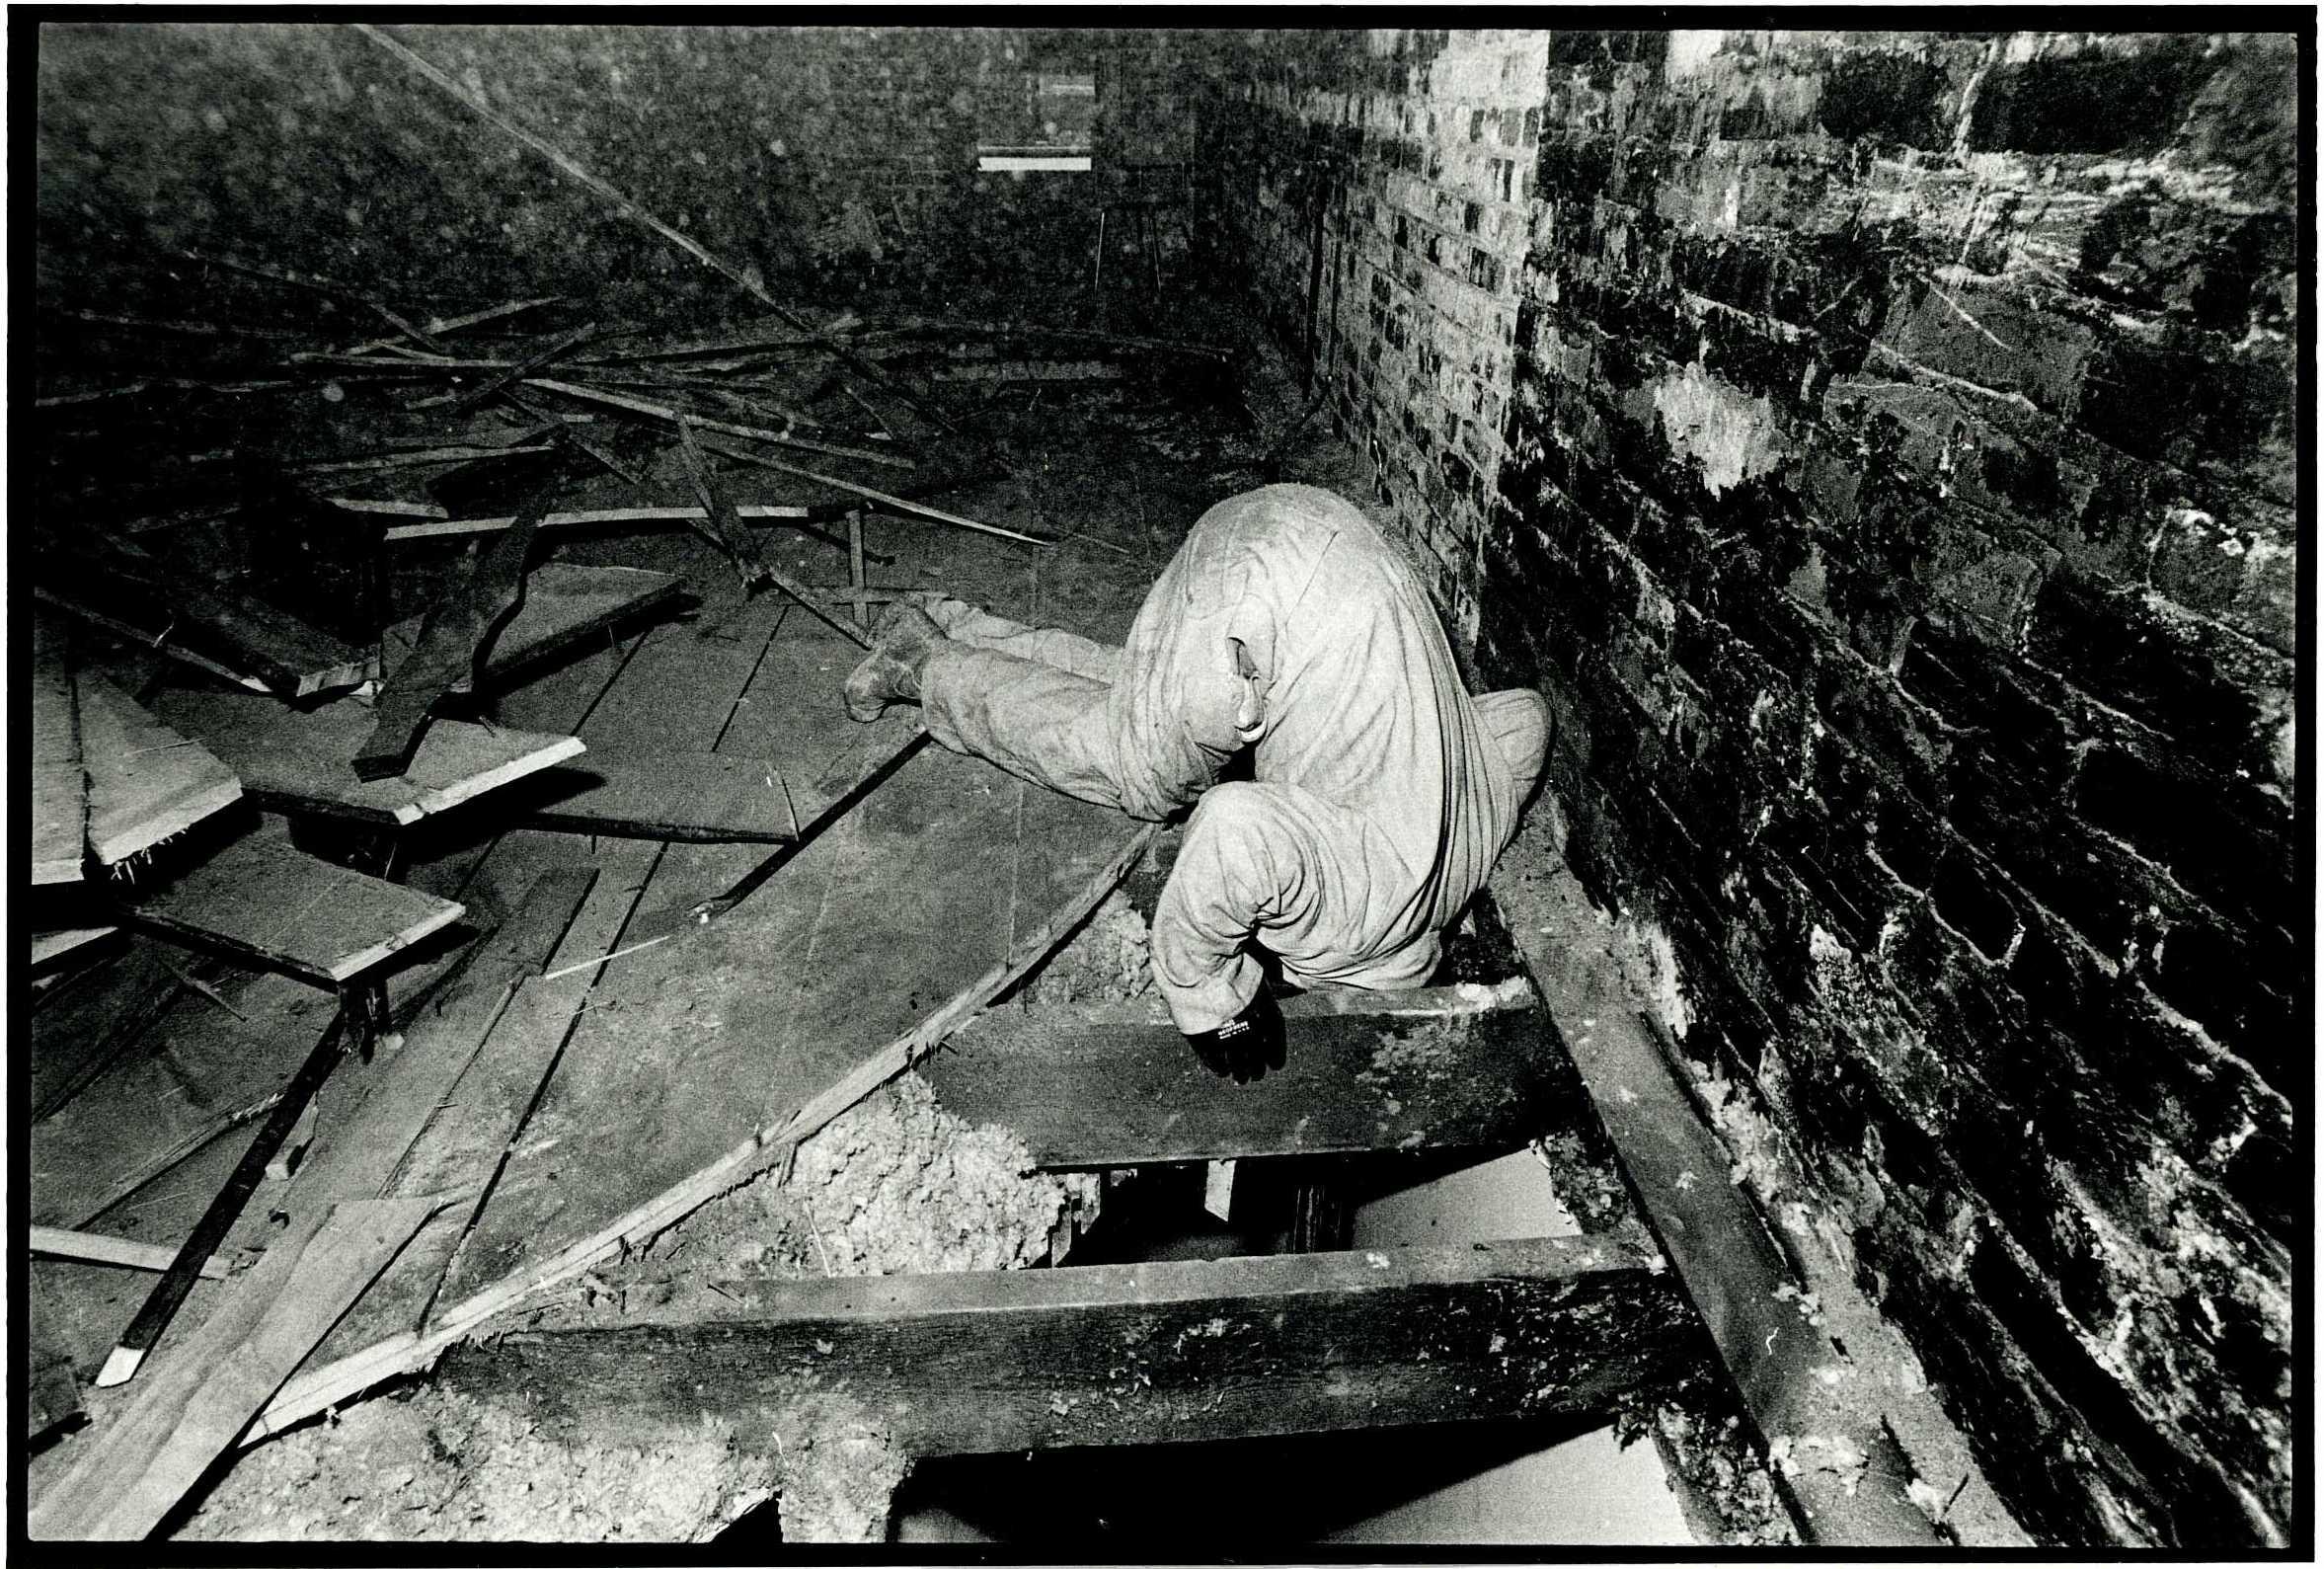 A person in coveralls, supporting themself with the rafters, tilts their whole body down into a hole in a floor.